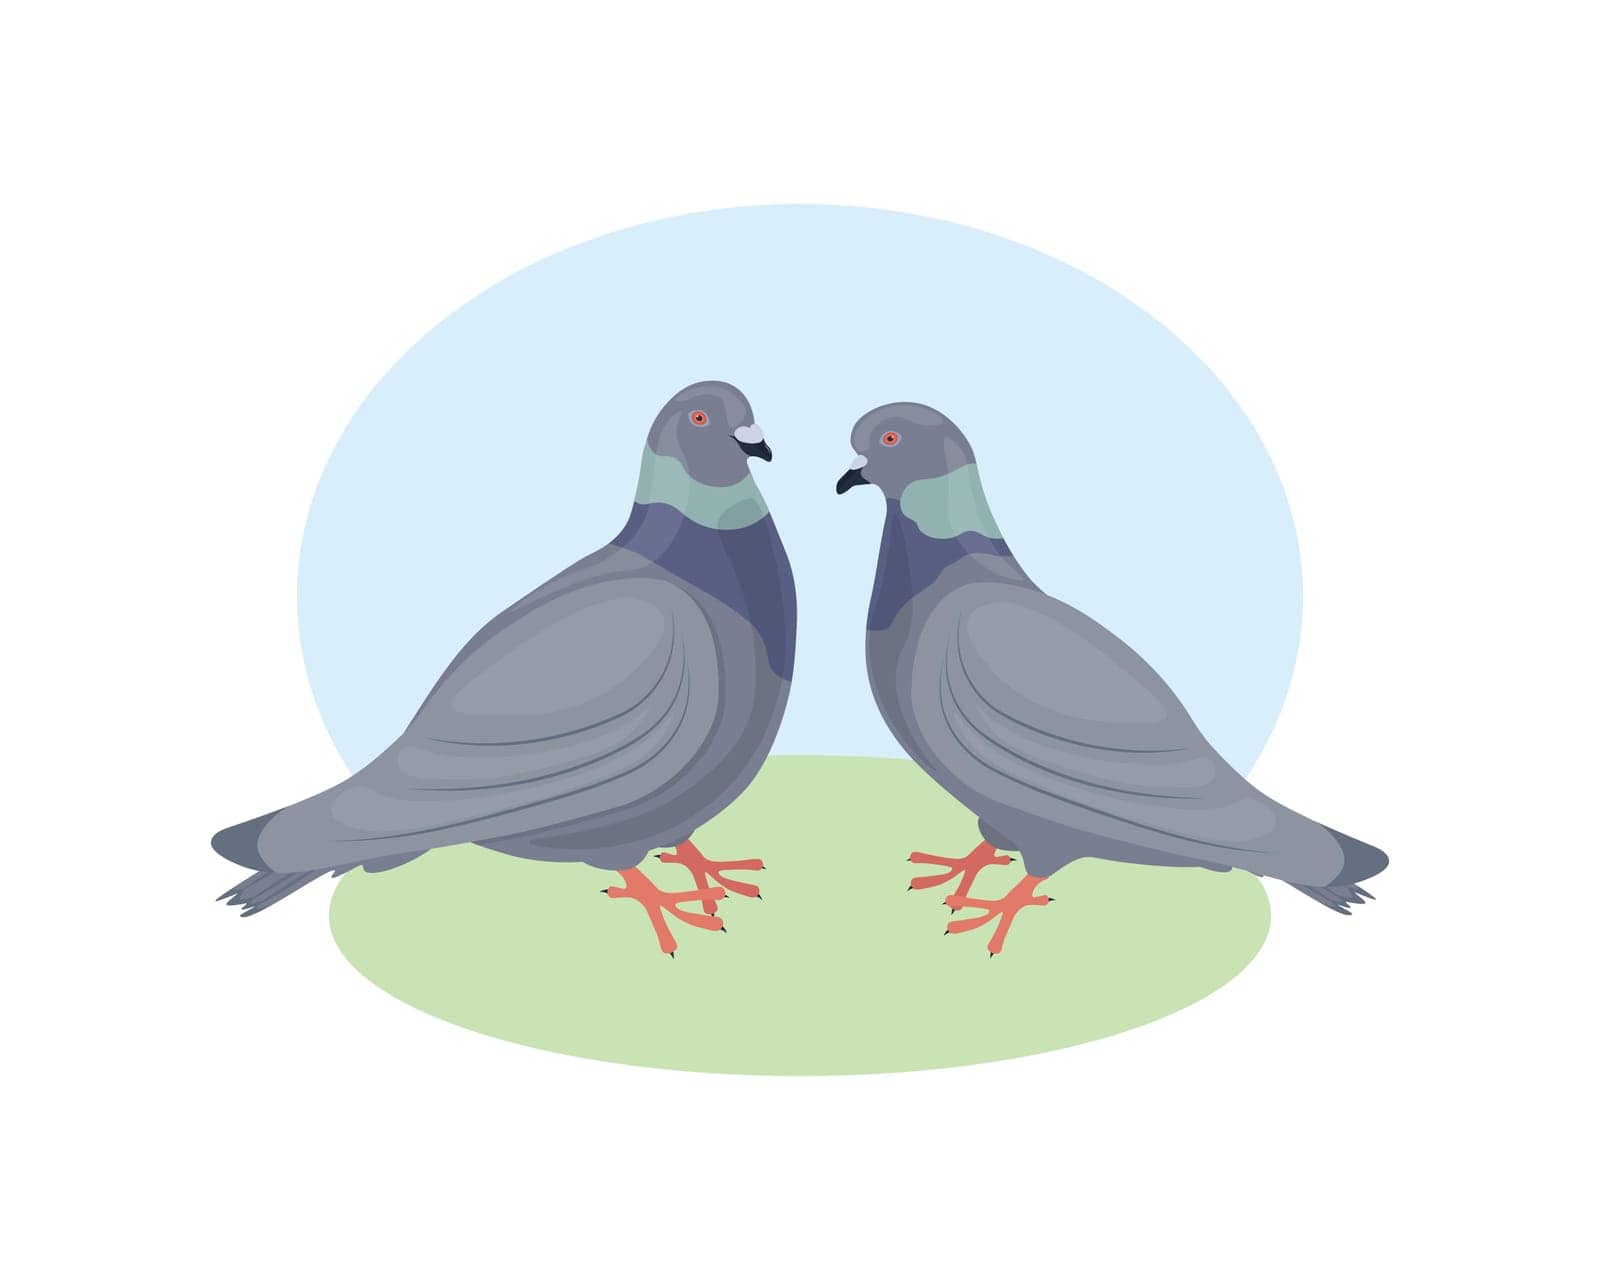 Pigeons. Two pigeons look at each other. Pigeon and dove. Urban birds. Vector illustration on a white background.